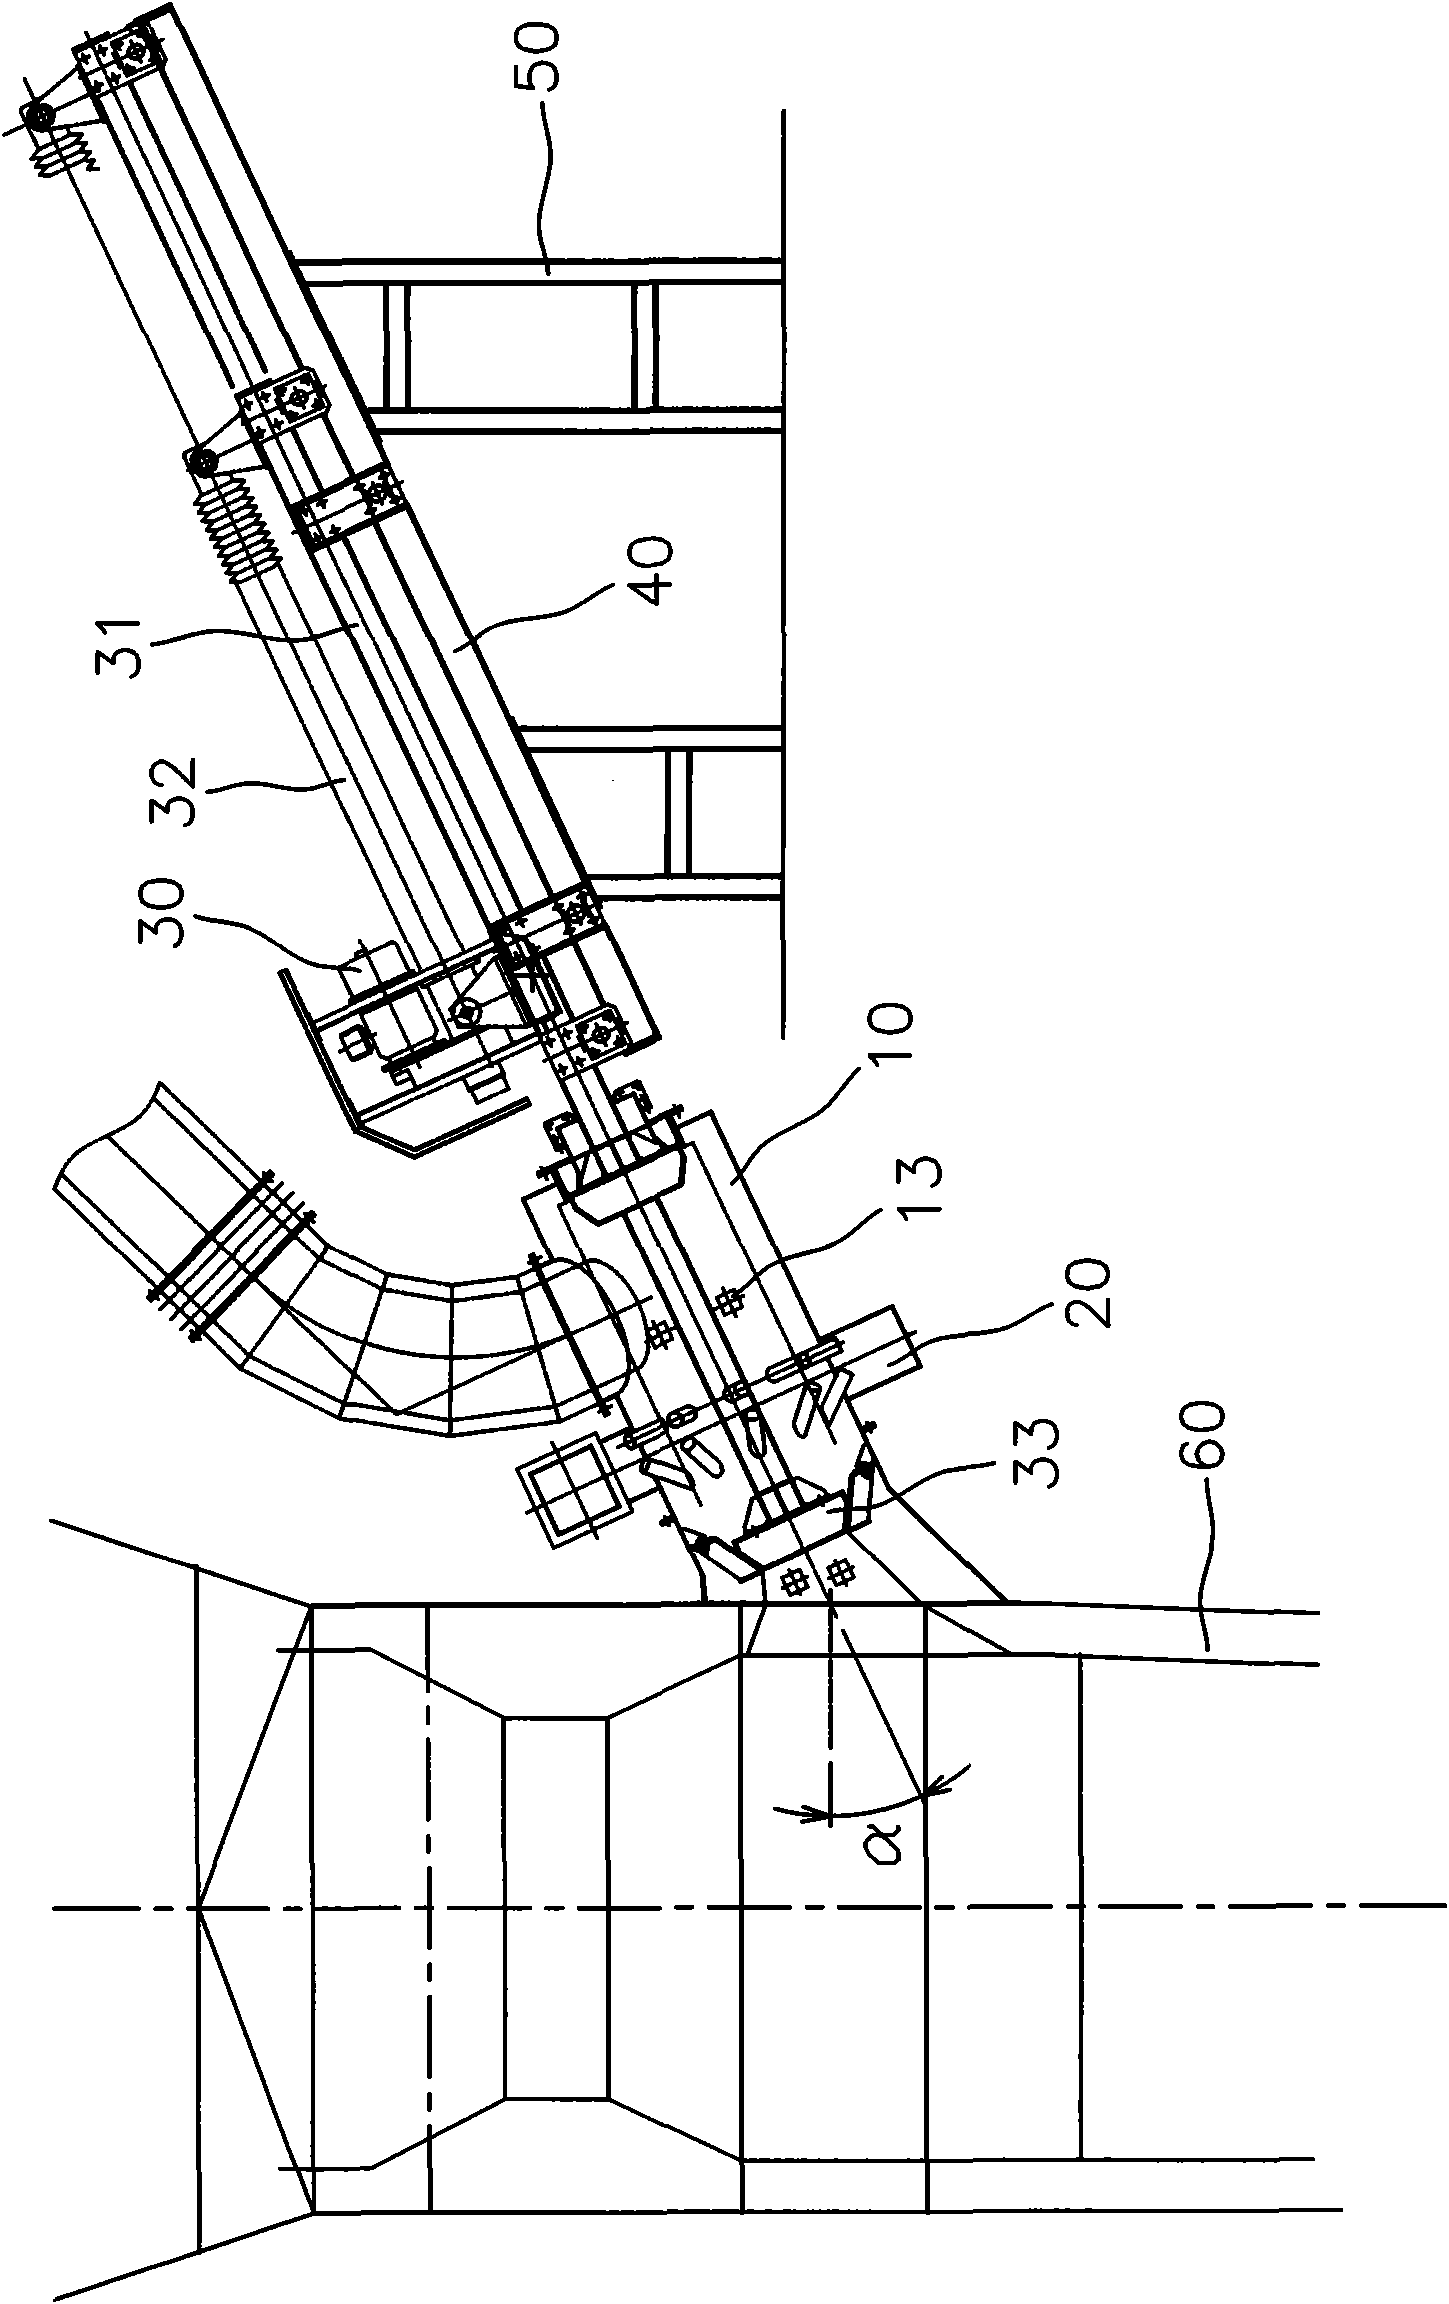 Diluting and cooling device